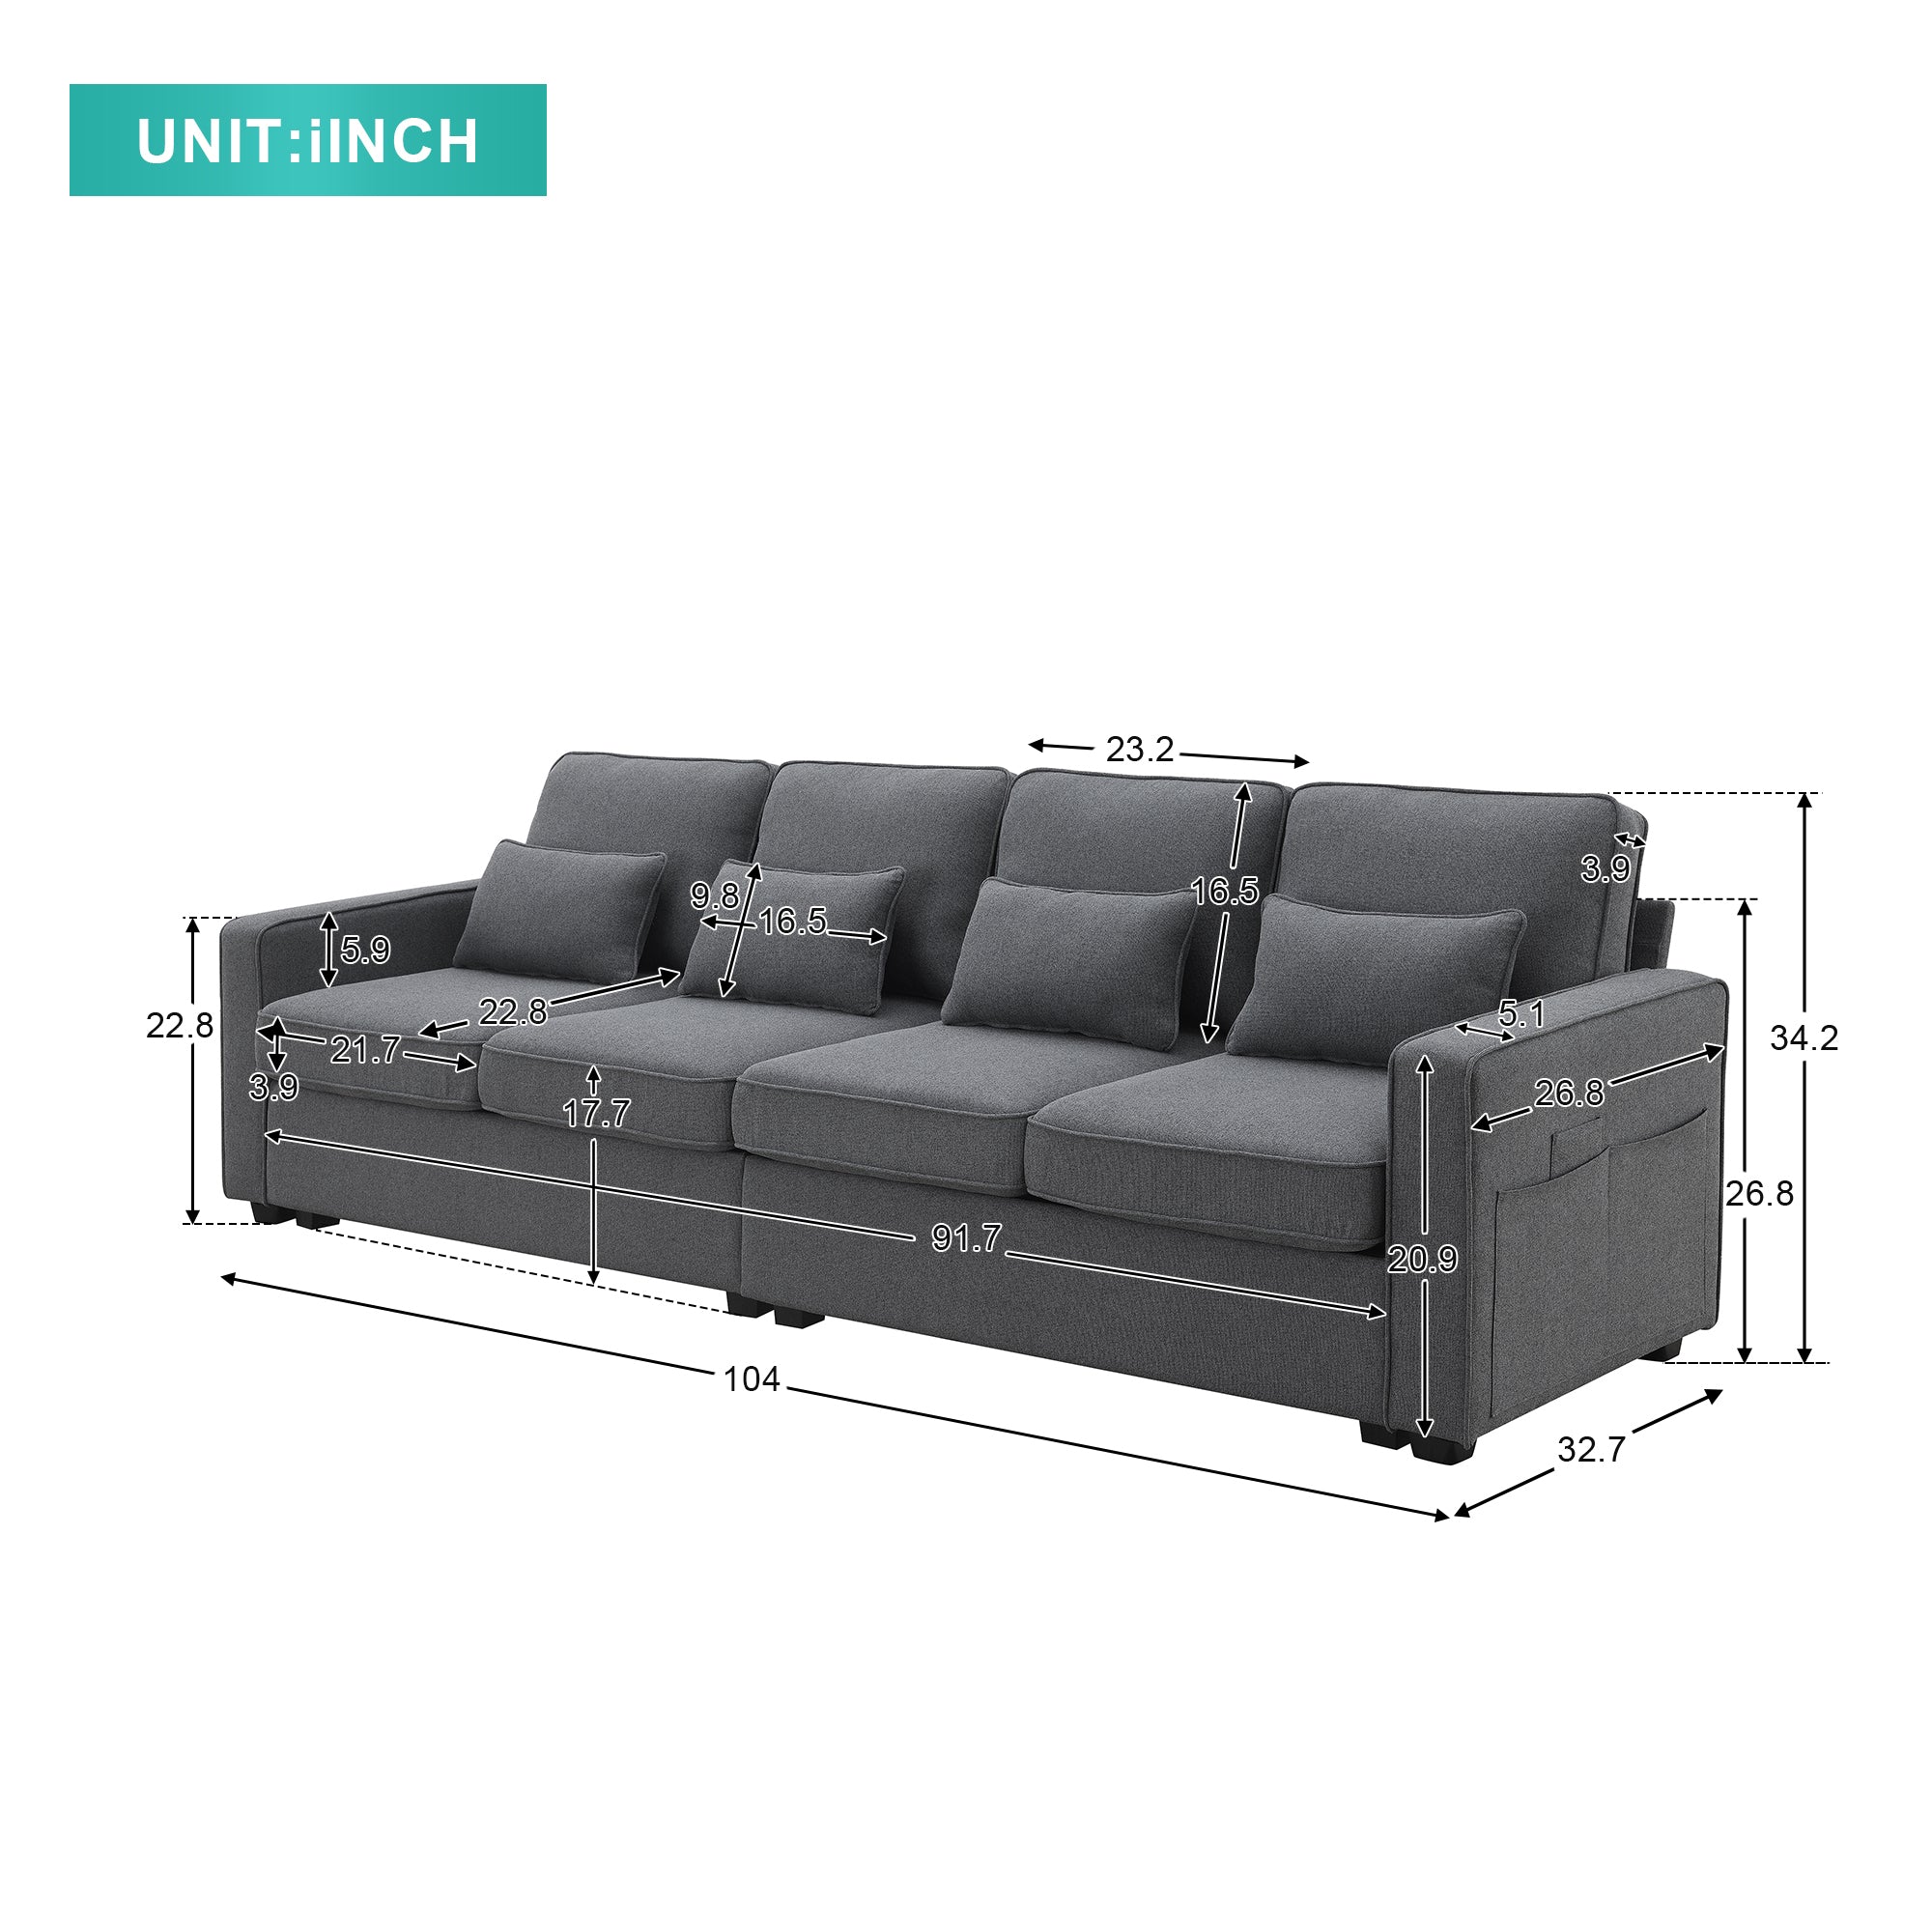 [VIDEO provided] [New] 104" 4-Seater Modern Linen Fabric Sofa with Armrest Pockets and 4 Pillows,Minimalist Style Couch for Living Room, Apartment, Office,3 Colors